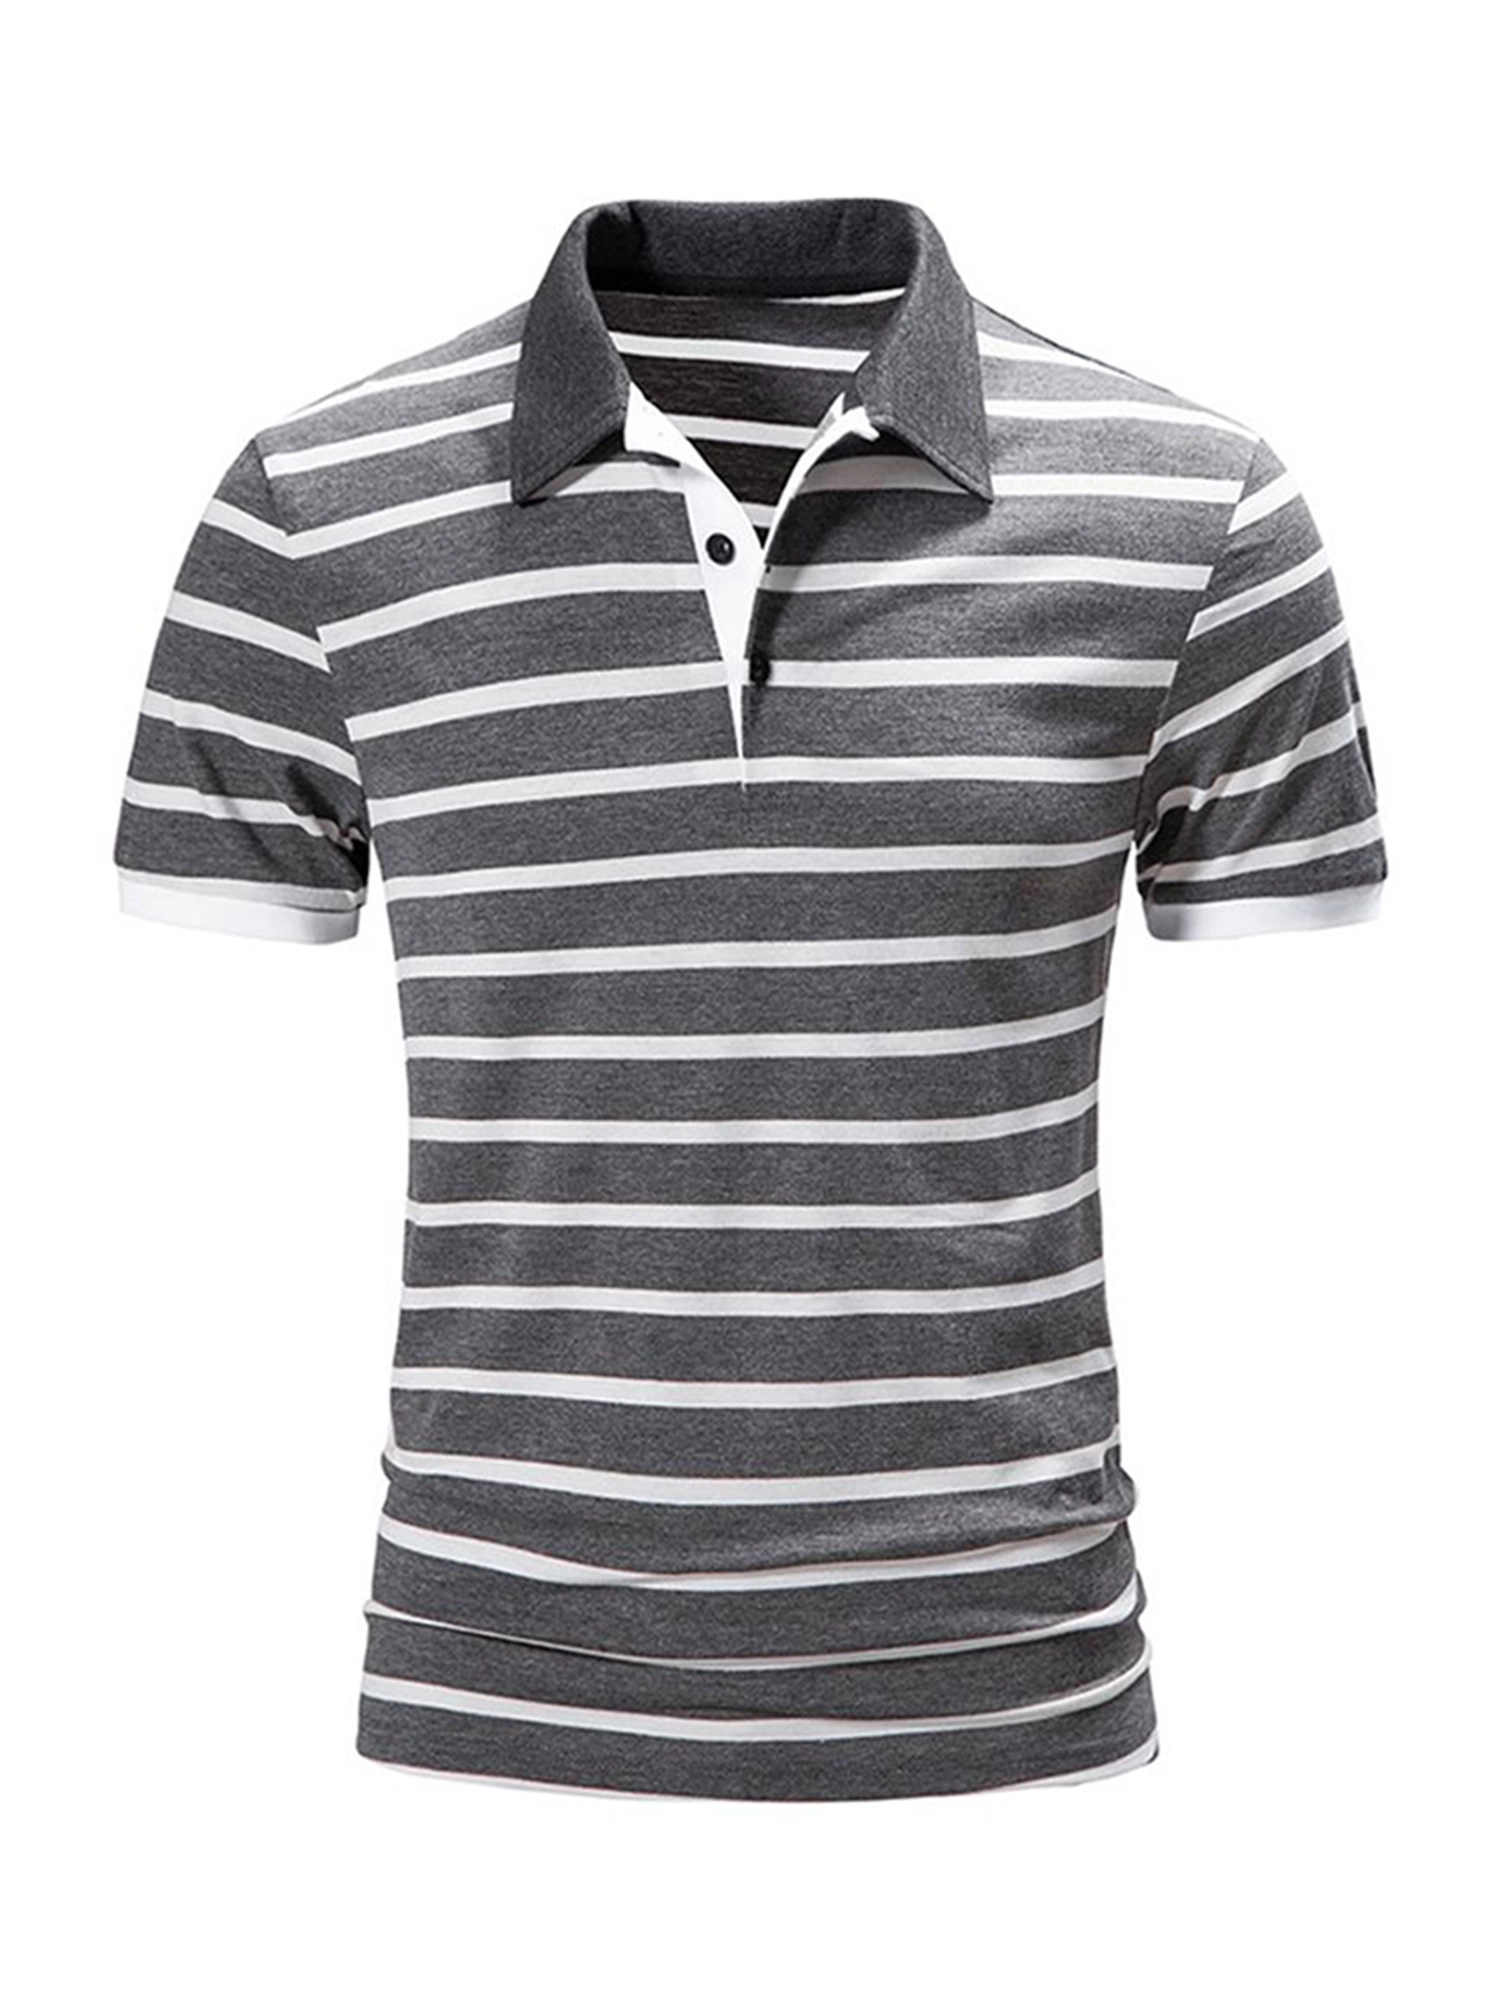 Mens Work Short Sleeve Striped Polo T Shirt Summer Casual Slim Fit Tops Sports Tee